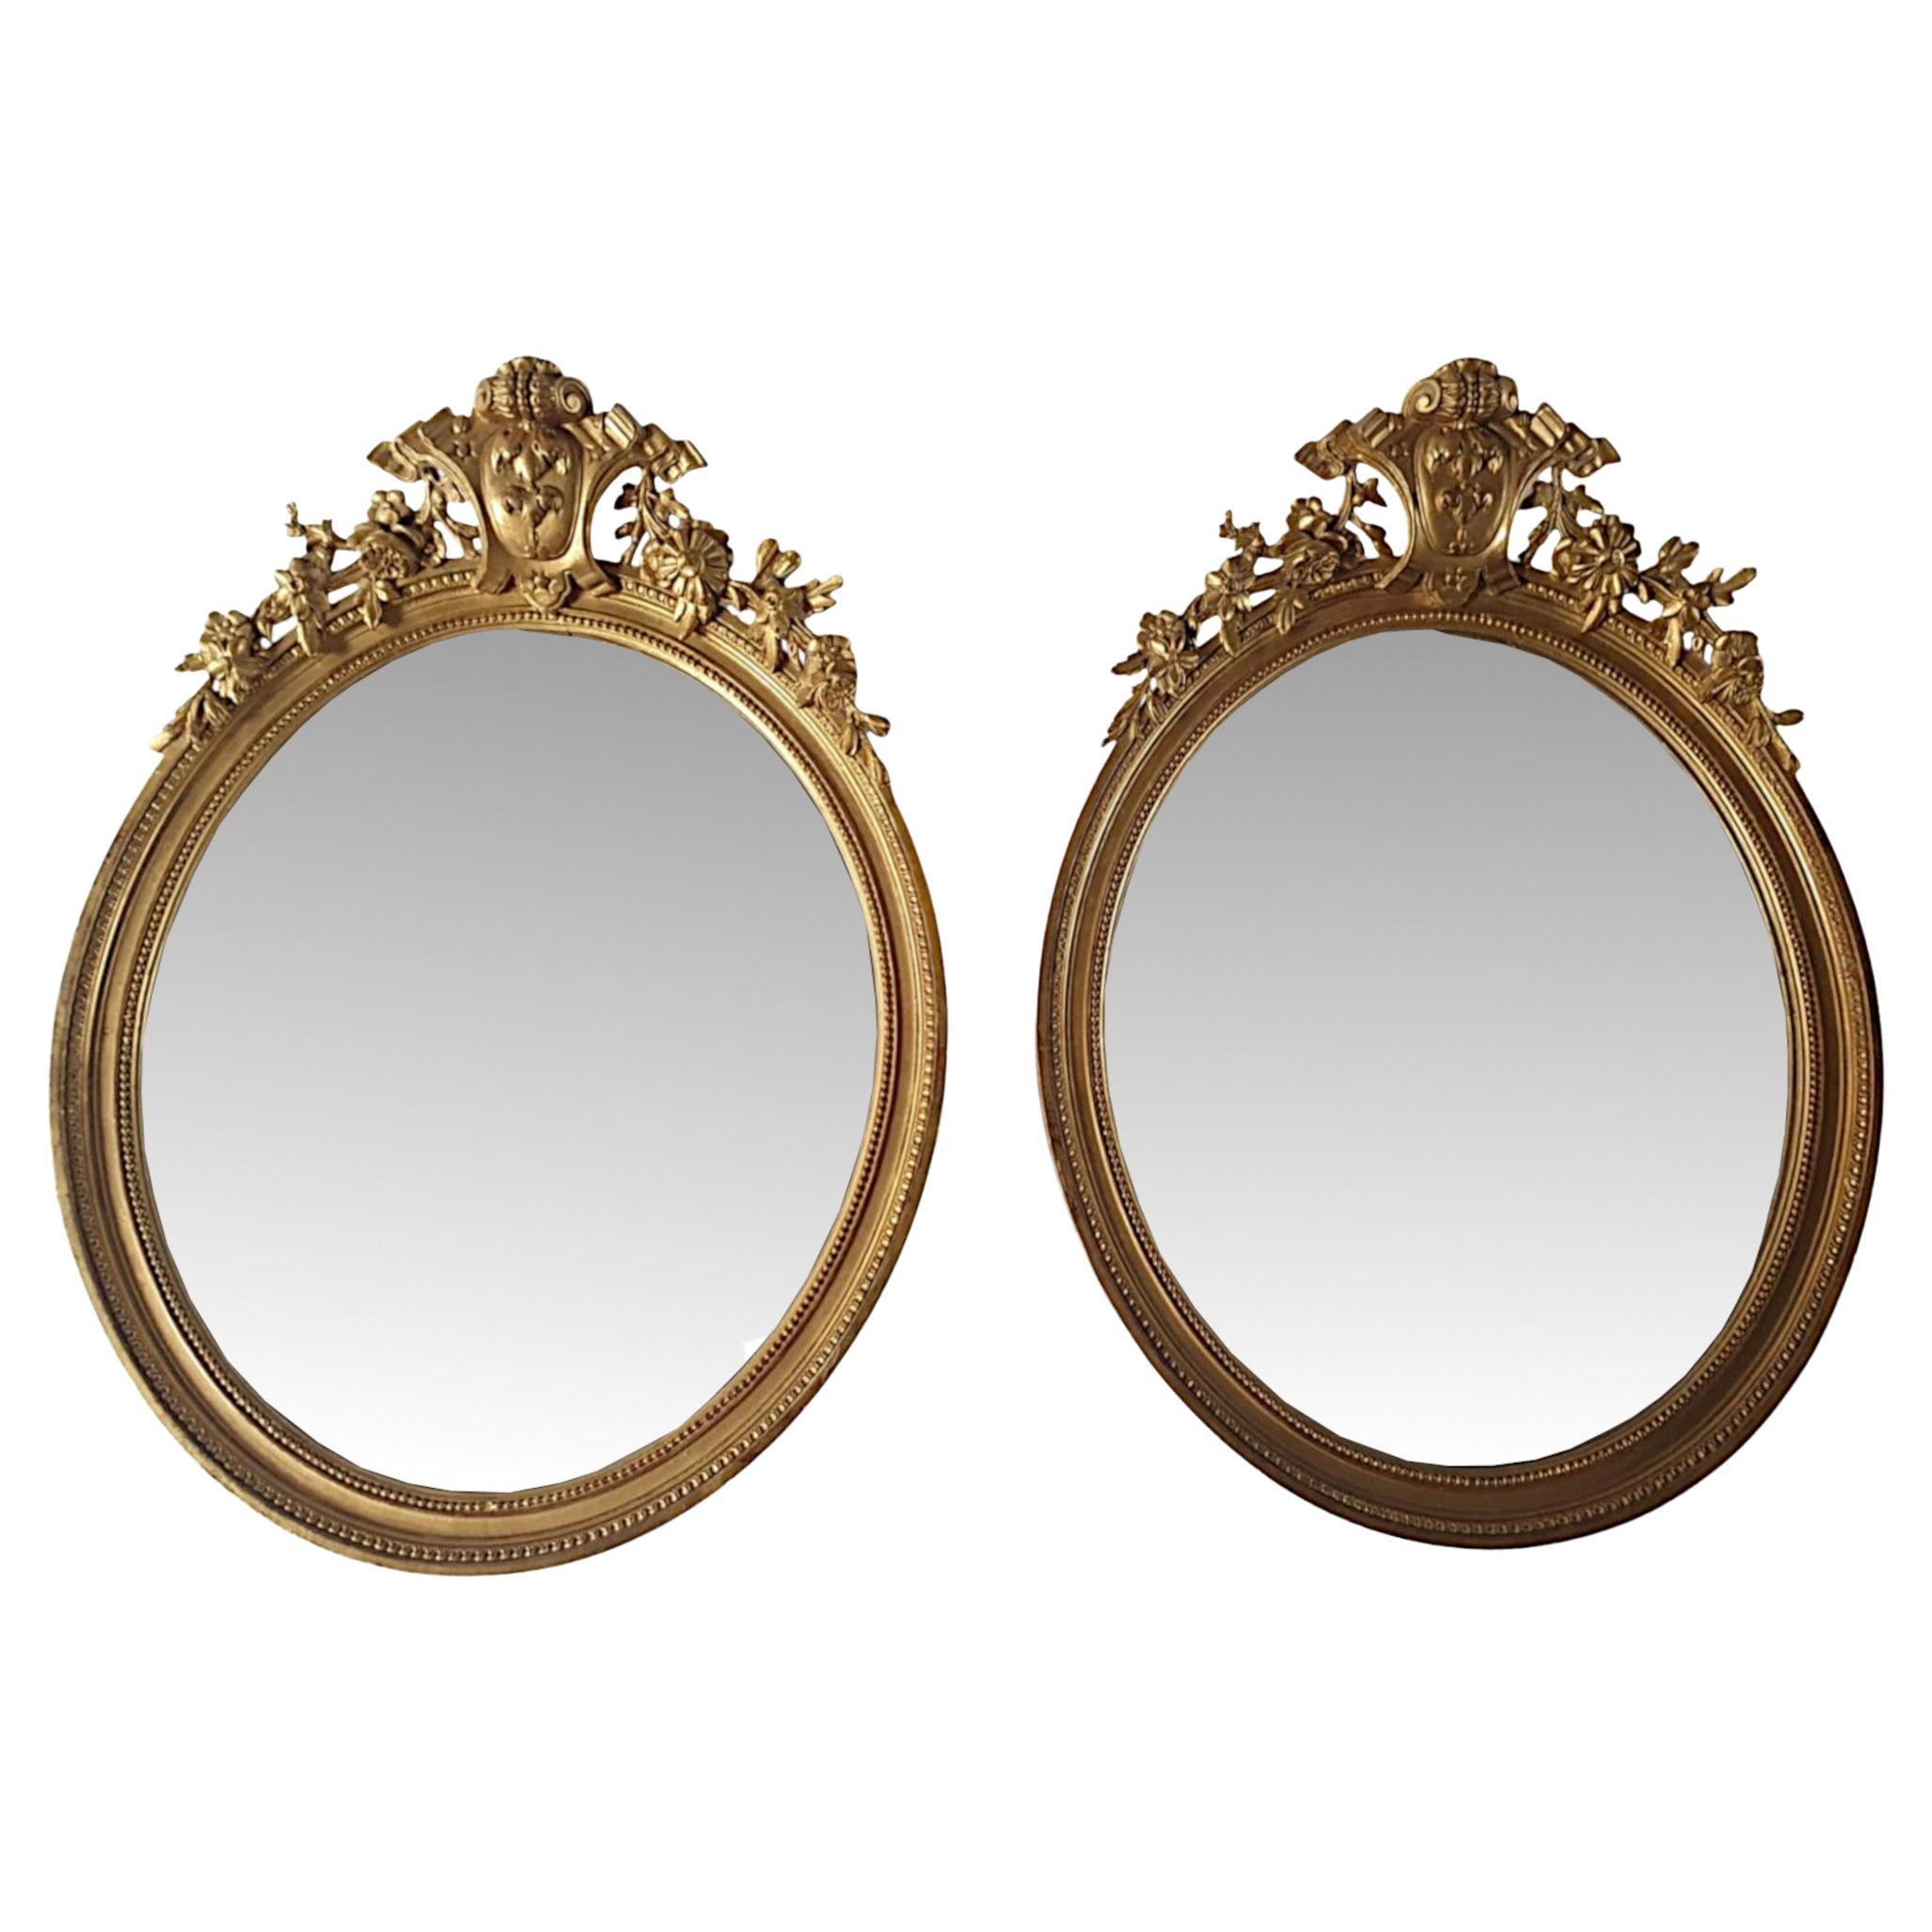 A Very Rare and Fine Pair of 19th Century Giltwood Pier Mirrors